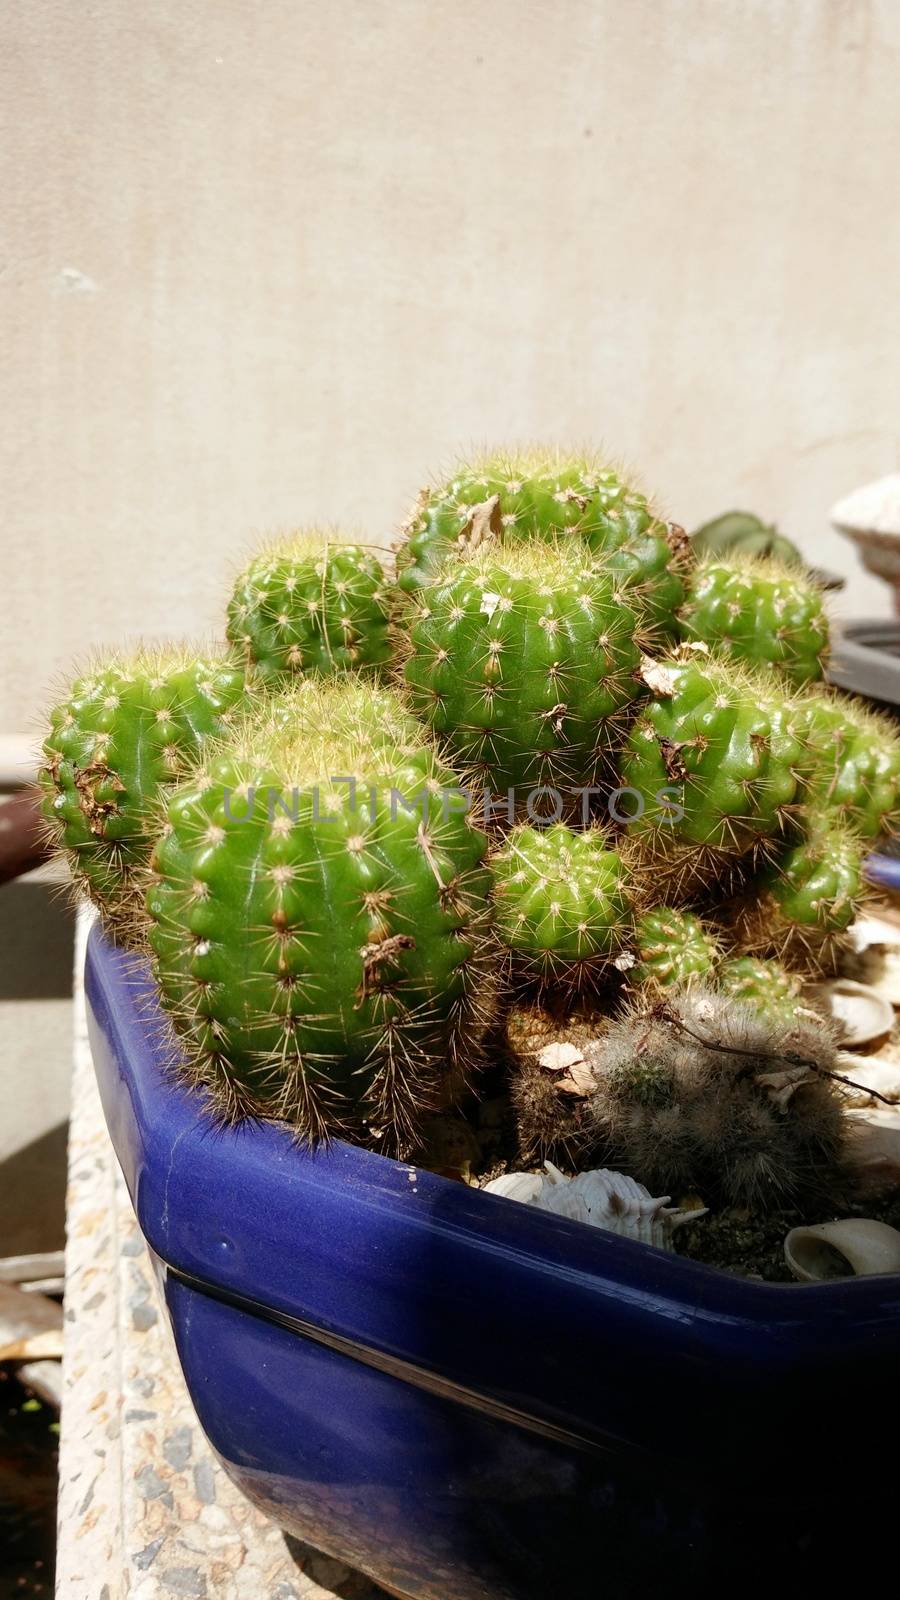 Cactus in the Blue Jardiniere by Sevenskyx